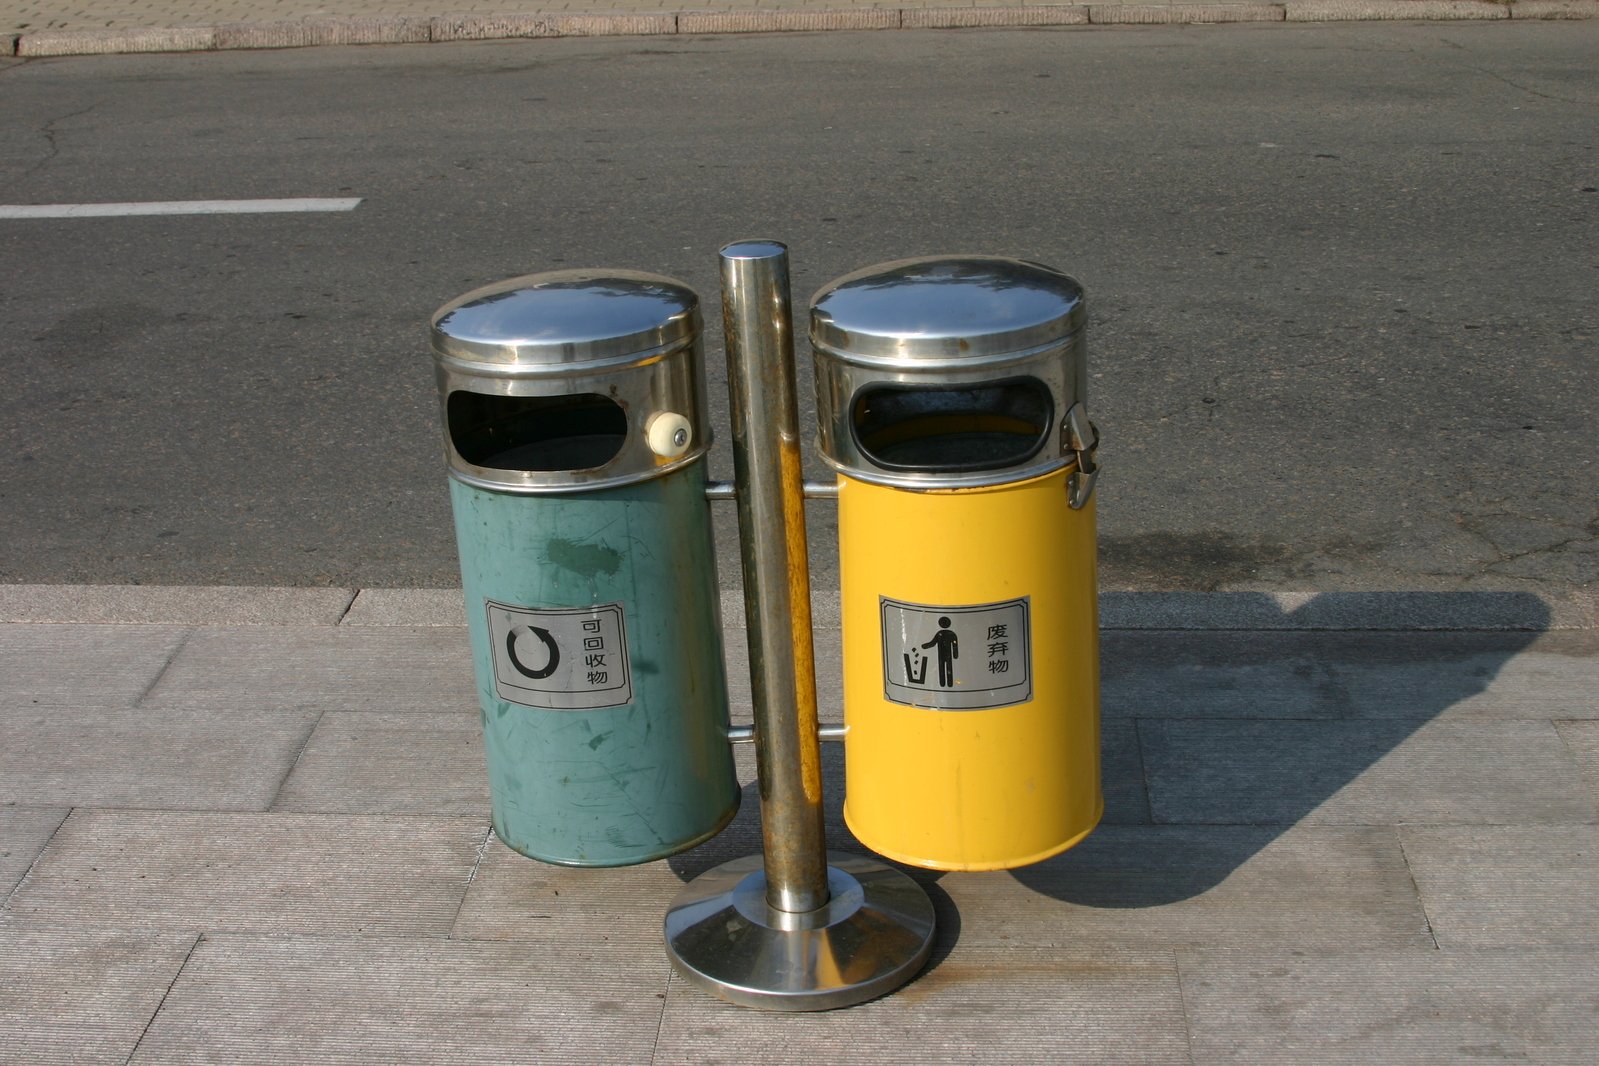 two metal garbage cans are on the sidewalk